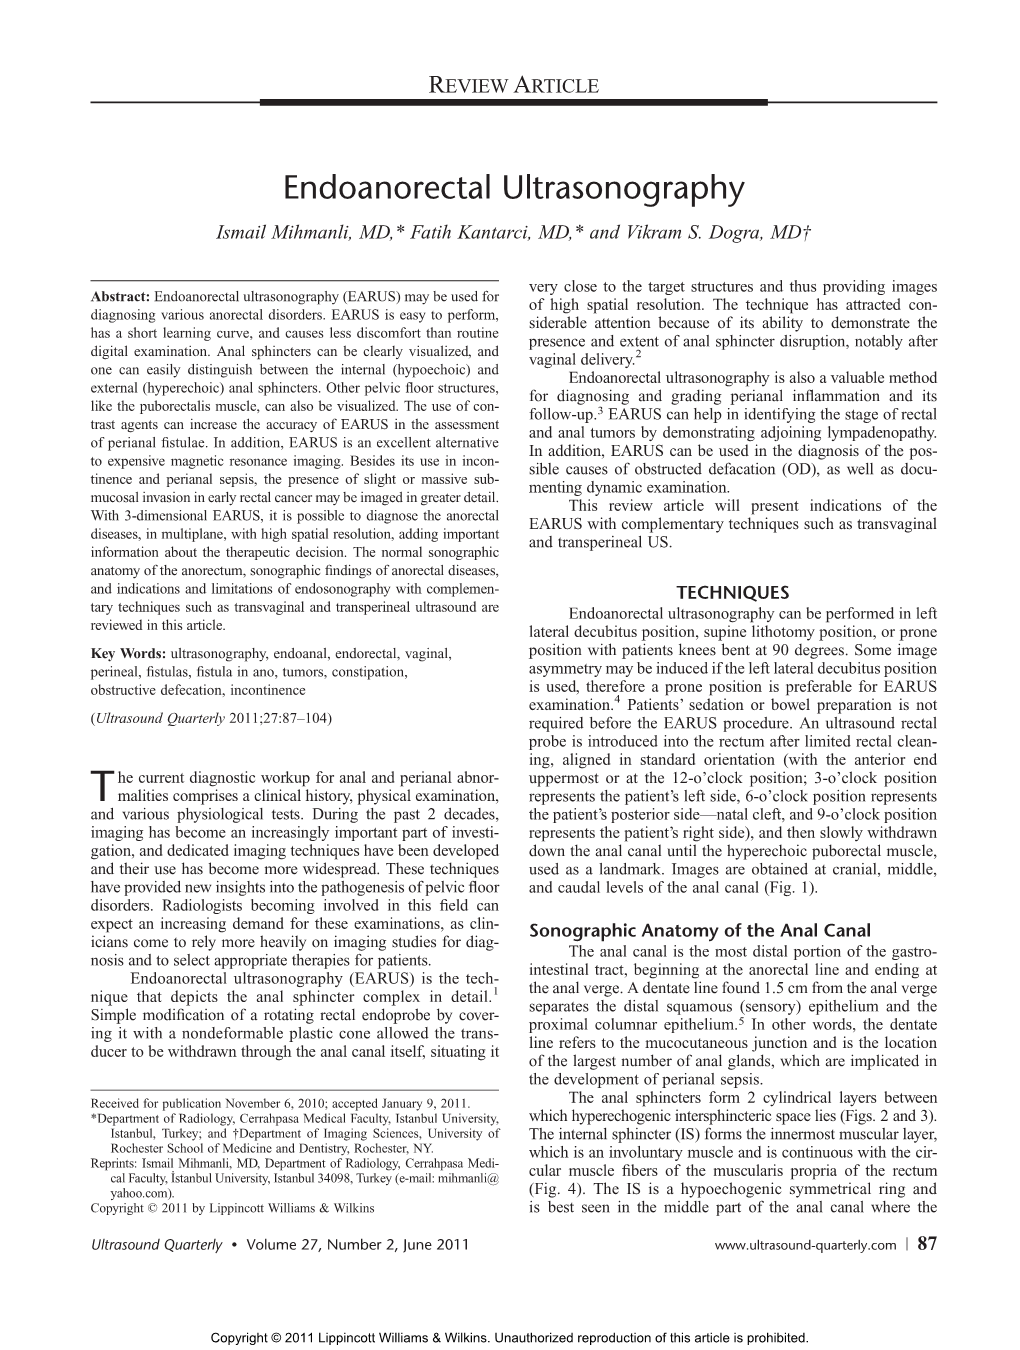 Endoanorectal Ultrasonography Ismail Mihmanli, MD,* Fatih Kantarci, MD,* and Vikram S